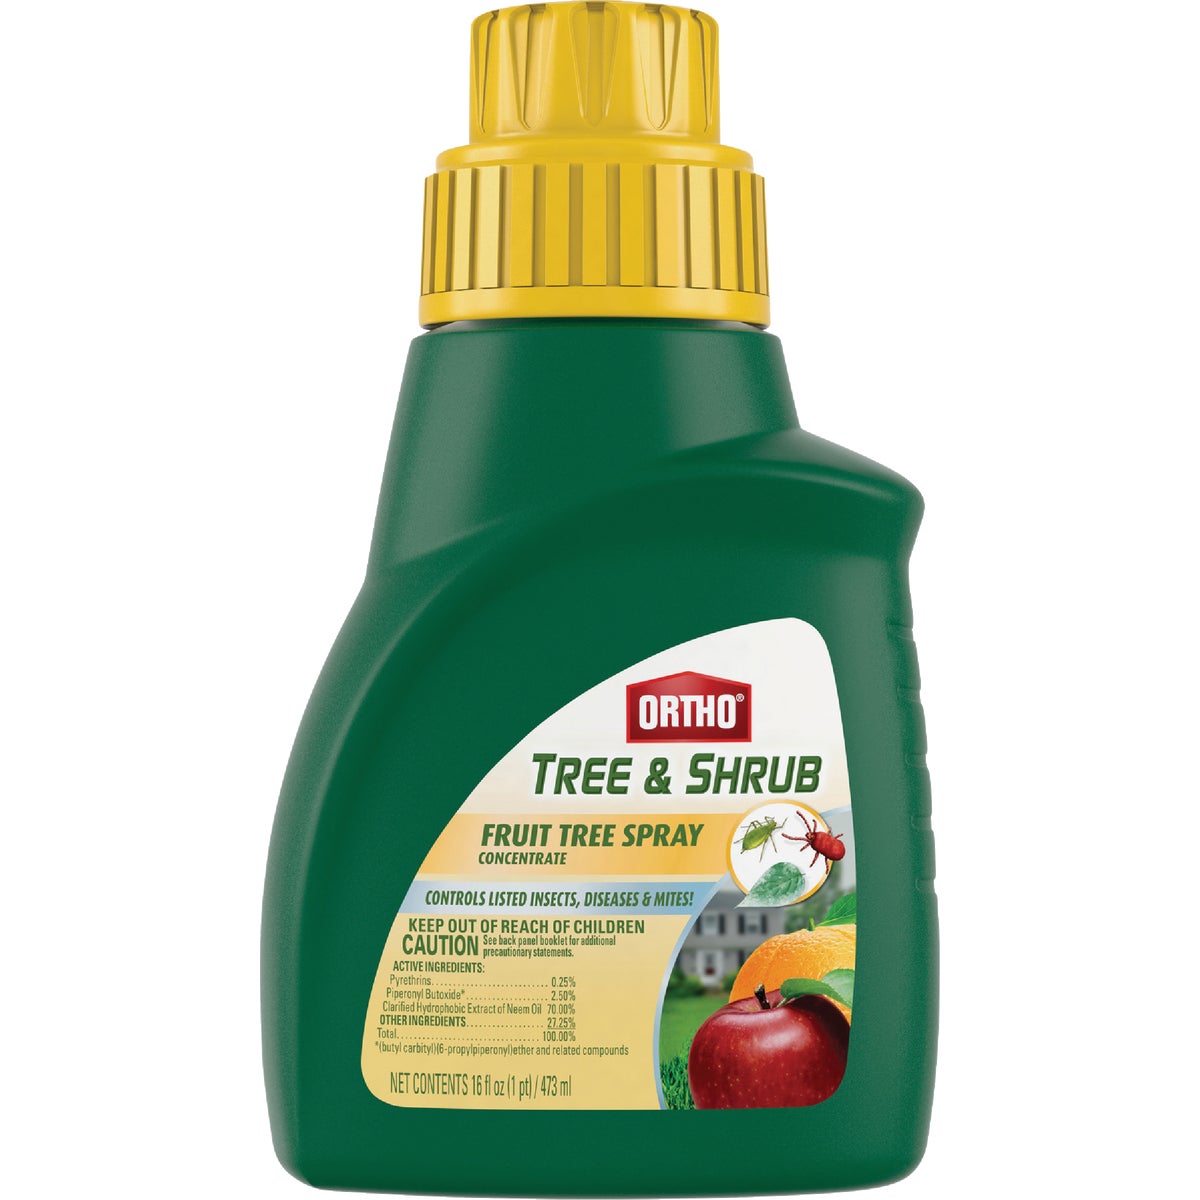 Item 731782, Fruit tree insect and disease killer.